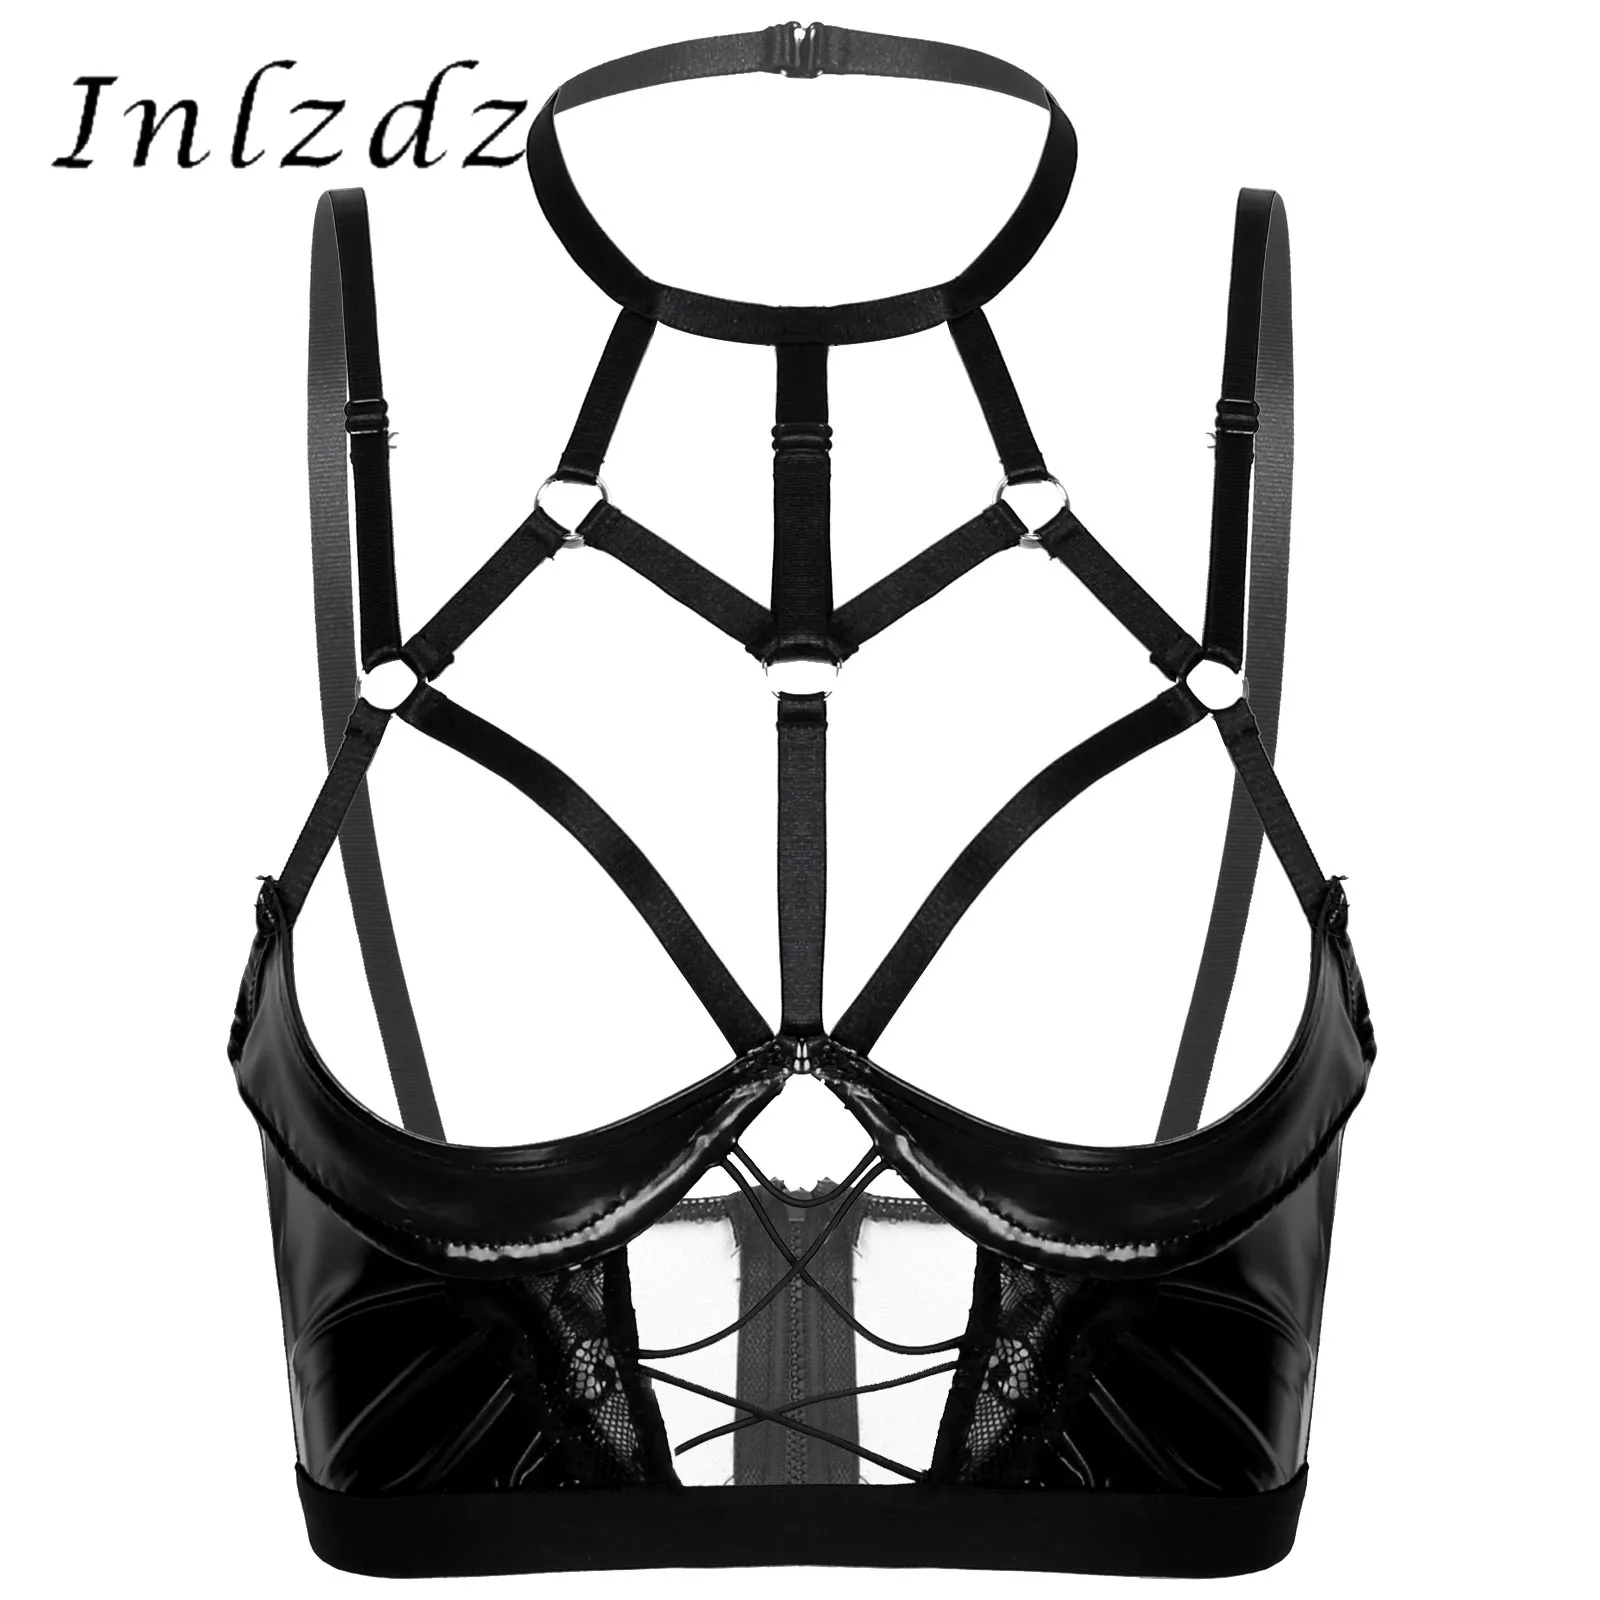 

Womens Halter Neck Lingerie Open Cup Bras Back Zipper Underwire Unlined Hot Brassiere Hollow Out Strappy Patent Leather Bra Tops